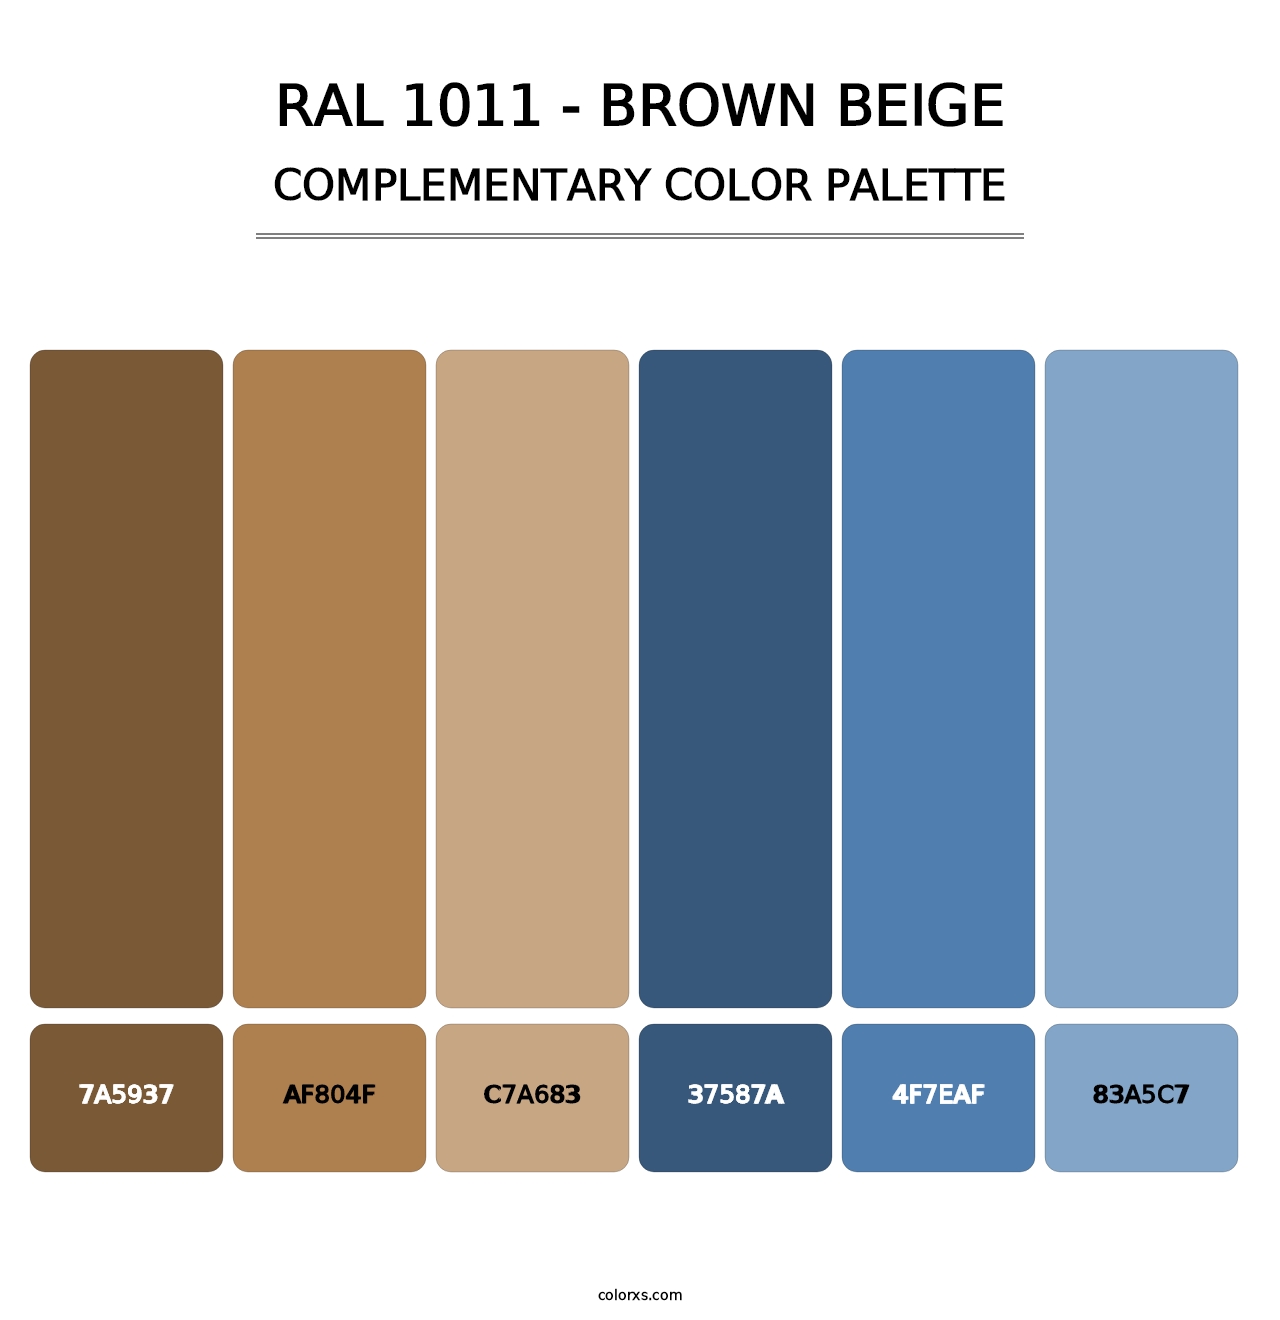 RAL 1011 - Brown Beige - Complementary Color Palette